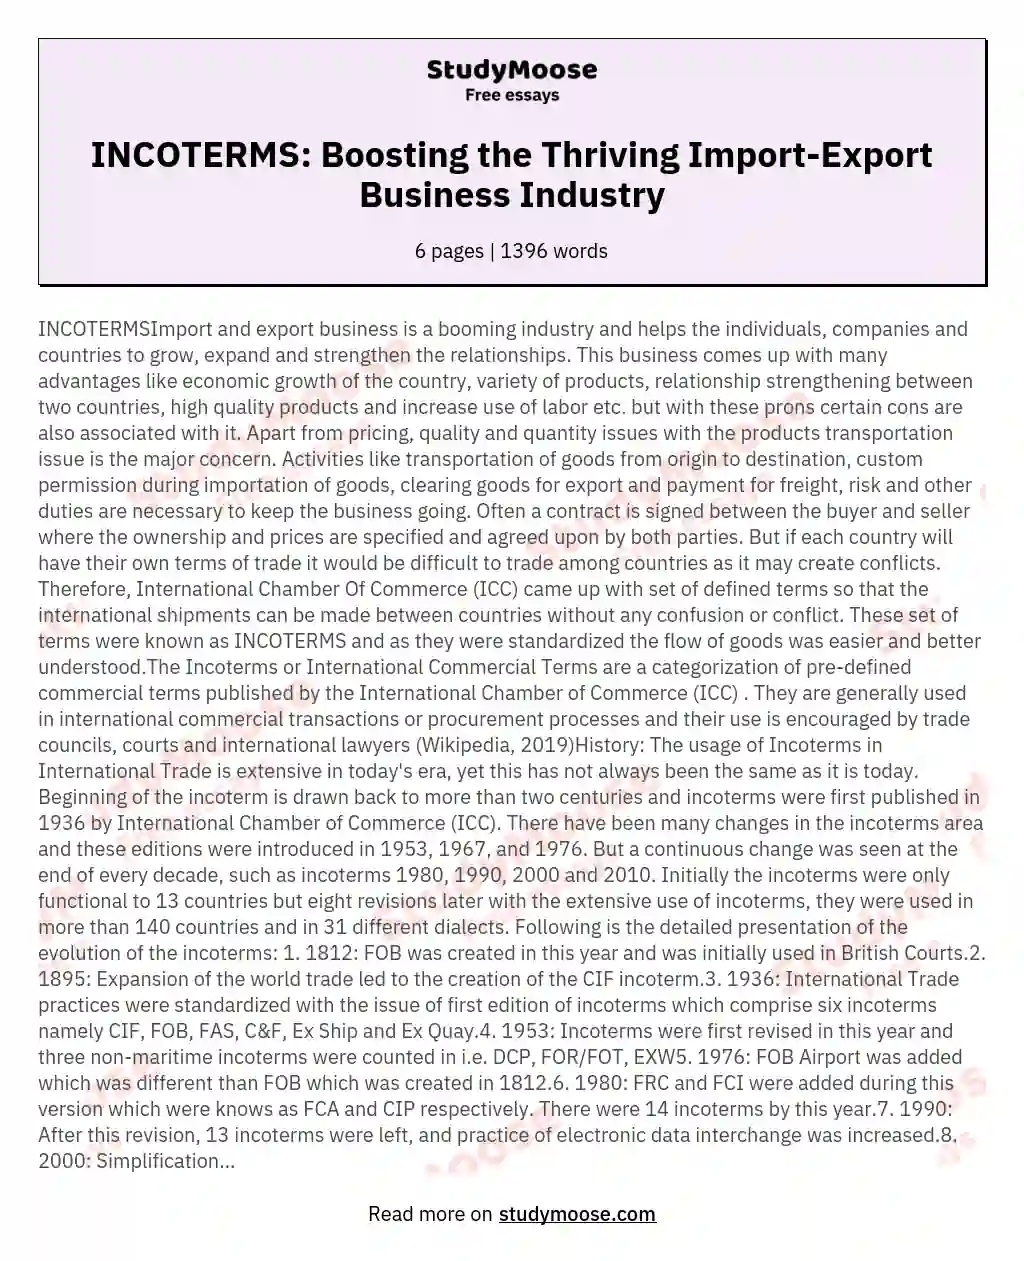 INCOTERMS: Boosting the Thriving Import-Export Business Industry essay